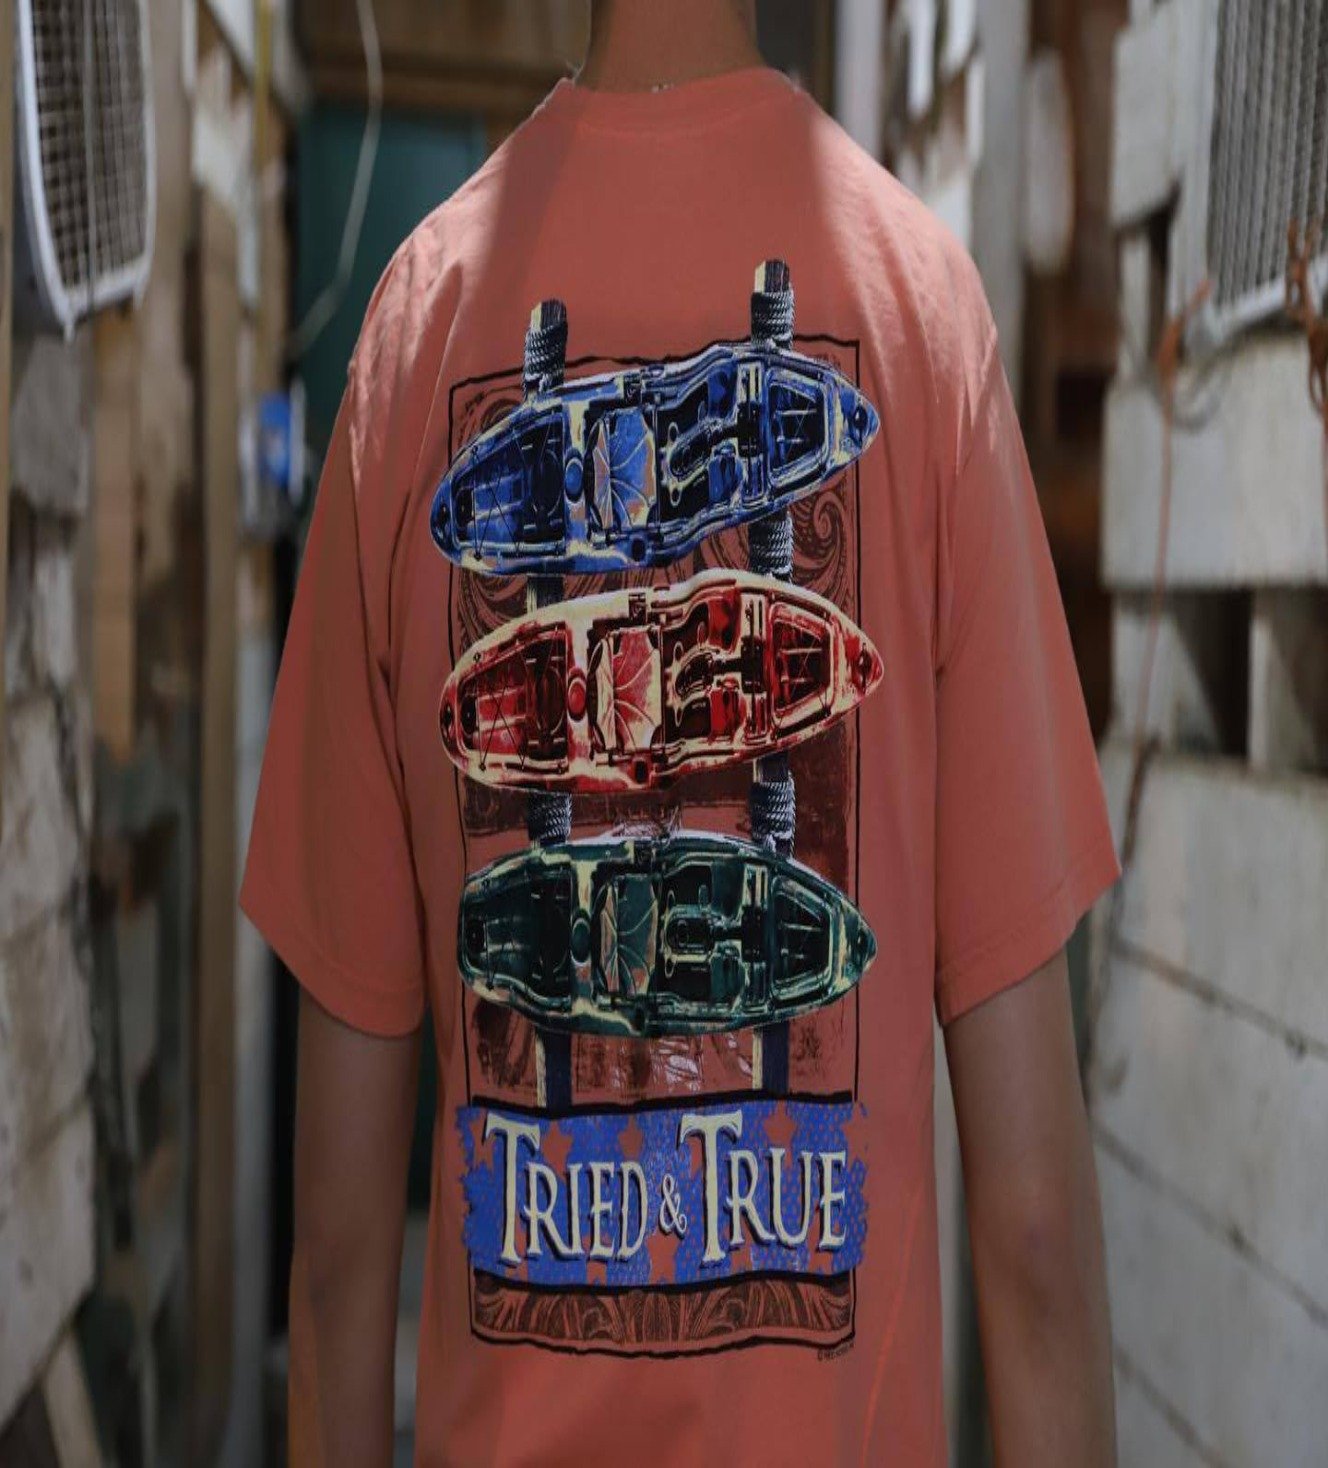 Kayak Stand - Short Sleeve T-Shirt by Tried and True Clothing